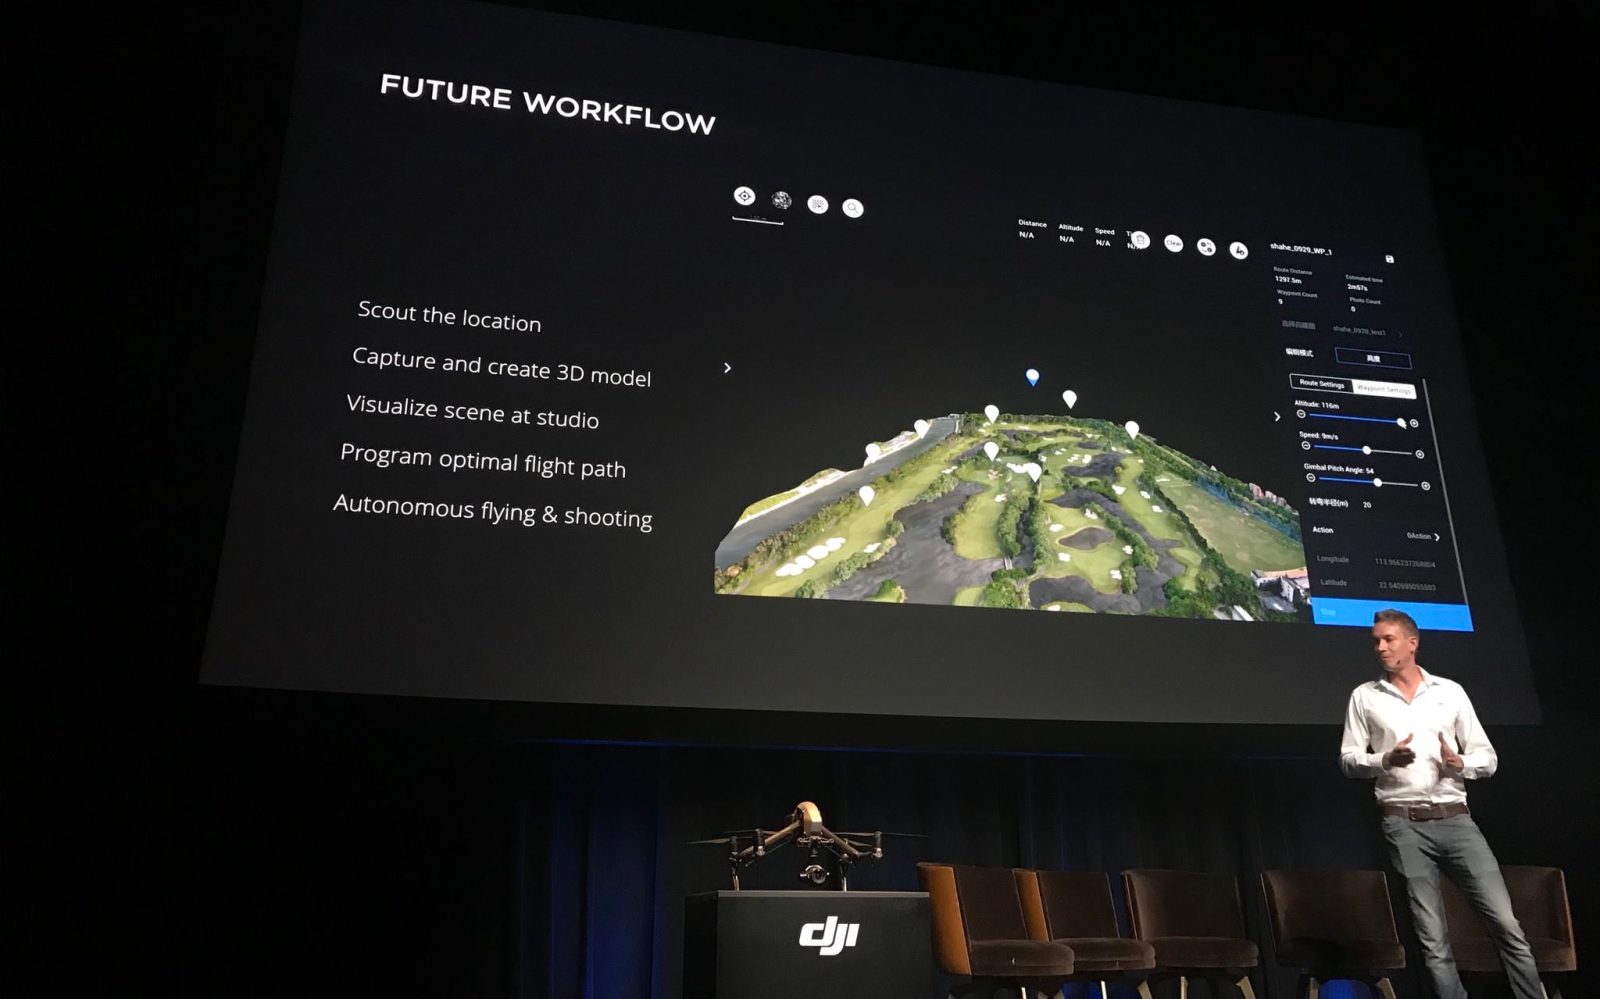 Project Vertex introduced at the DJI Zenmuse X7 event in Hollywood, CA